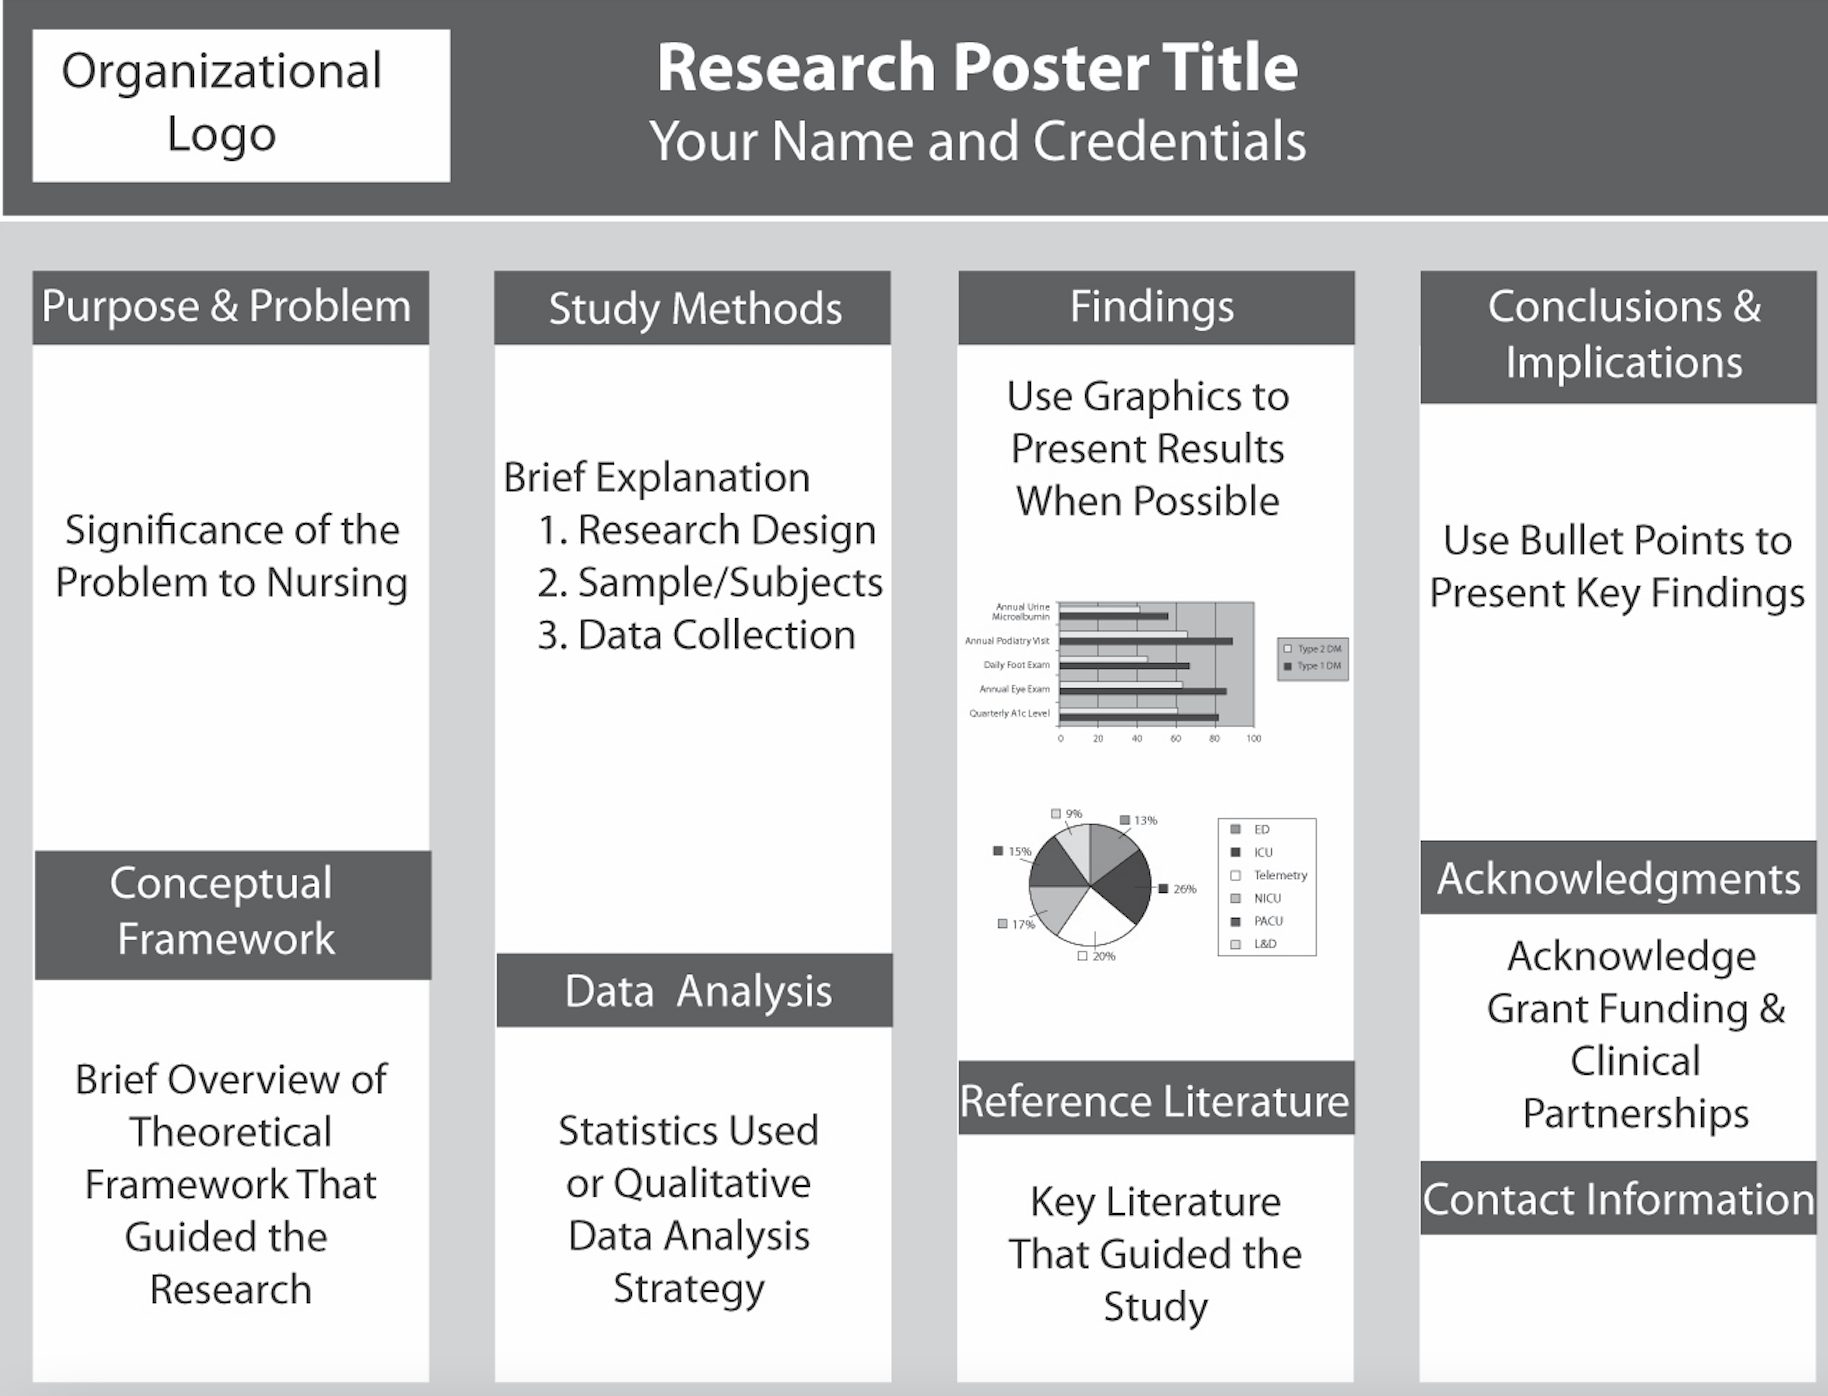 standard poster size for scientific conference